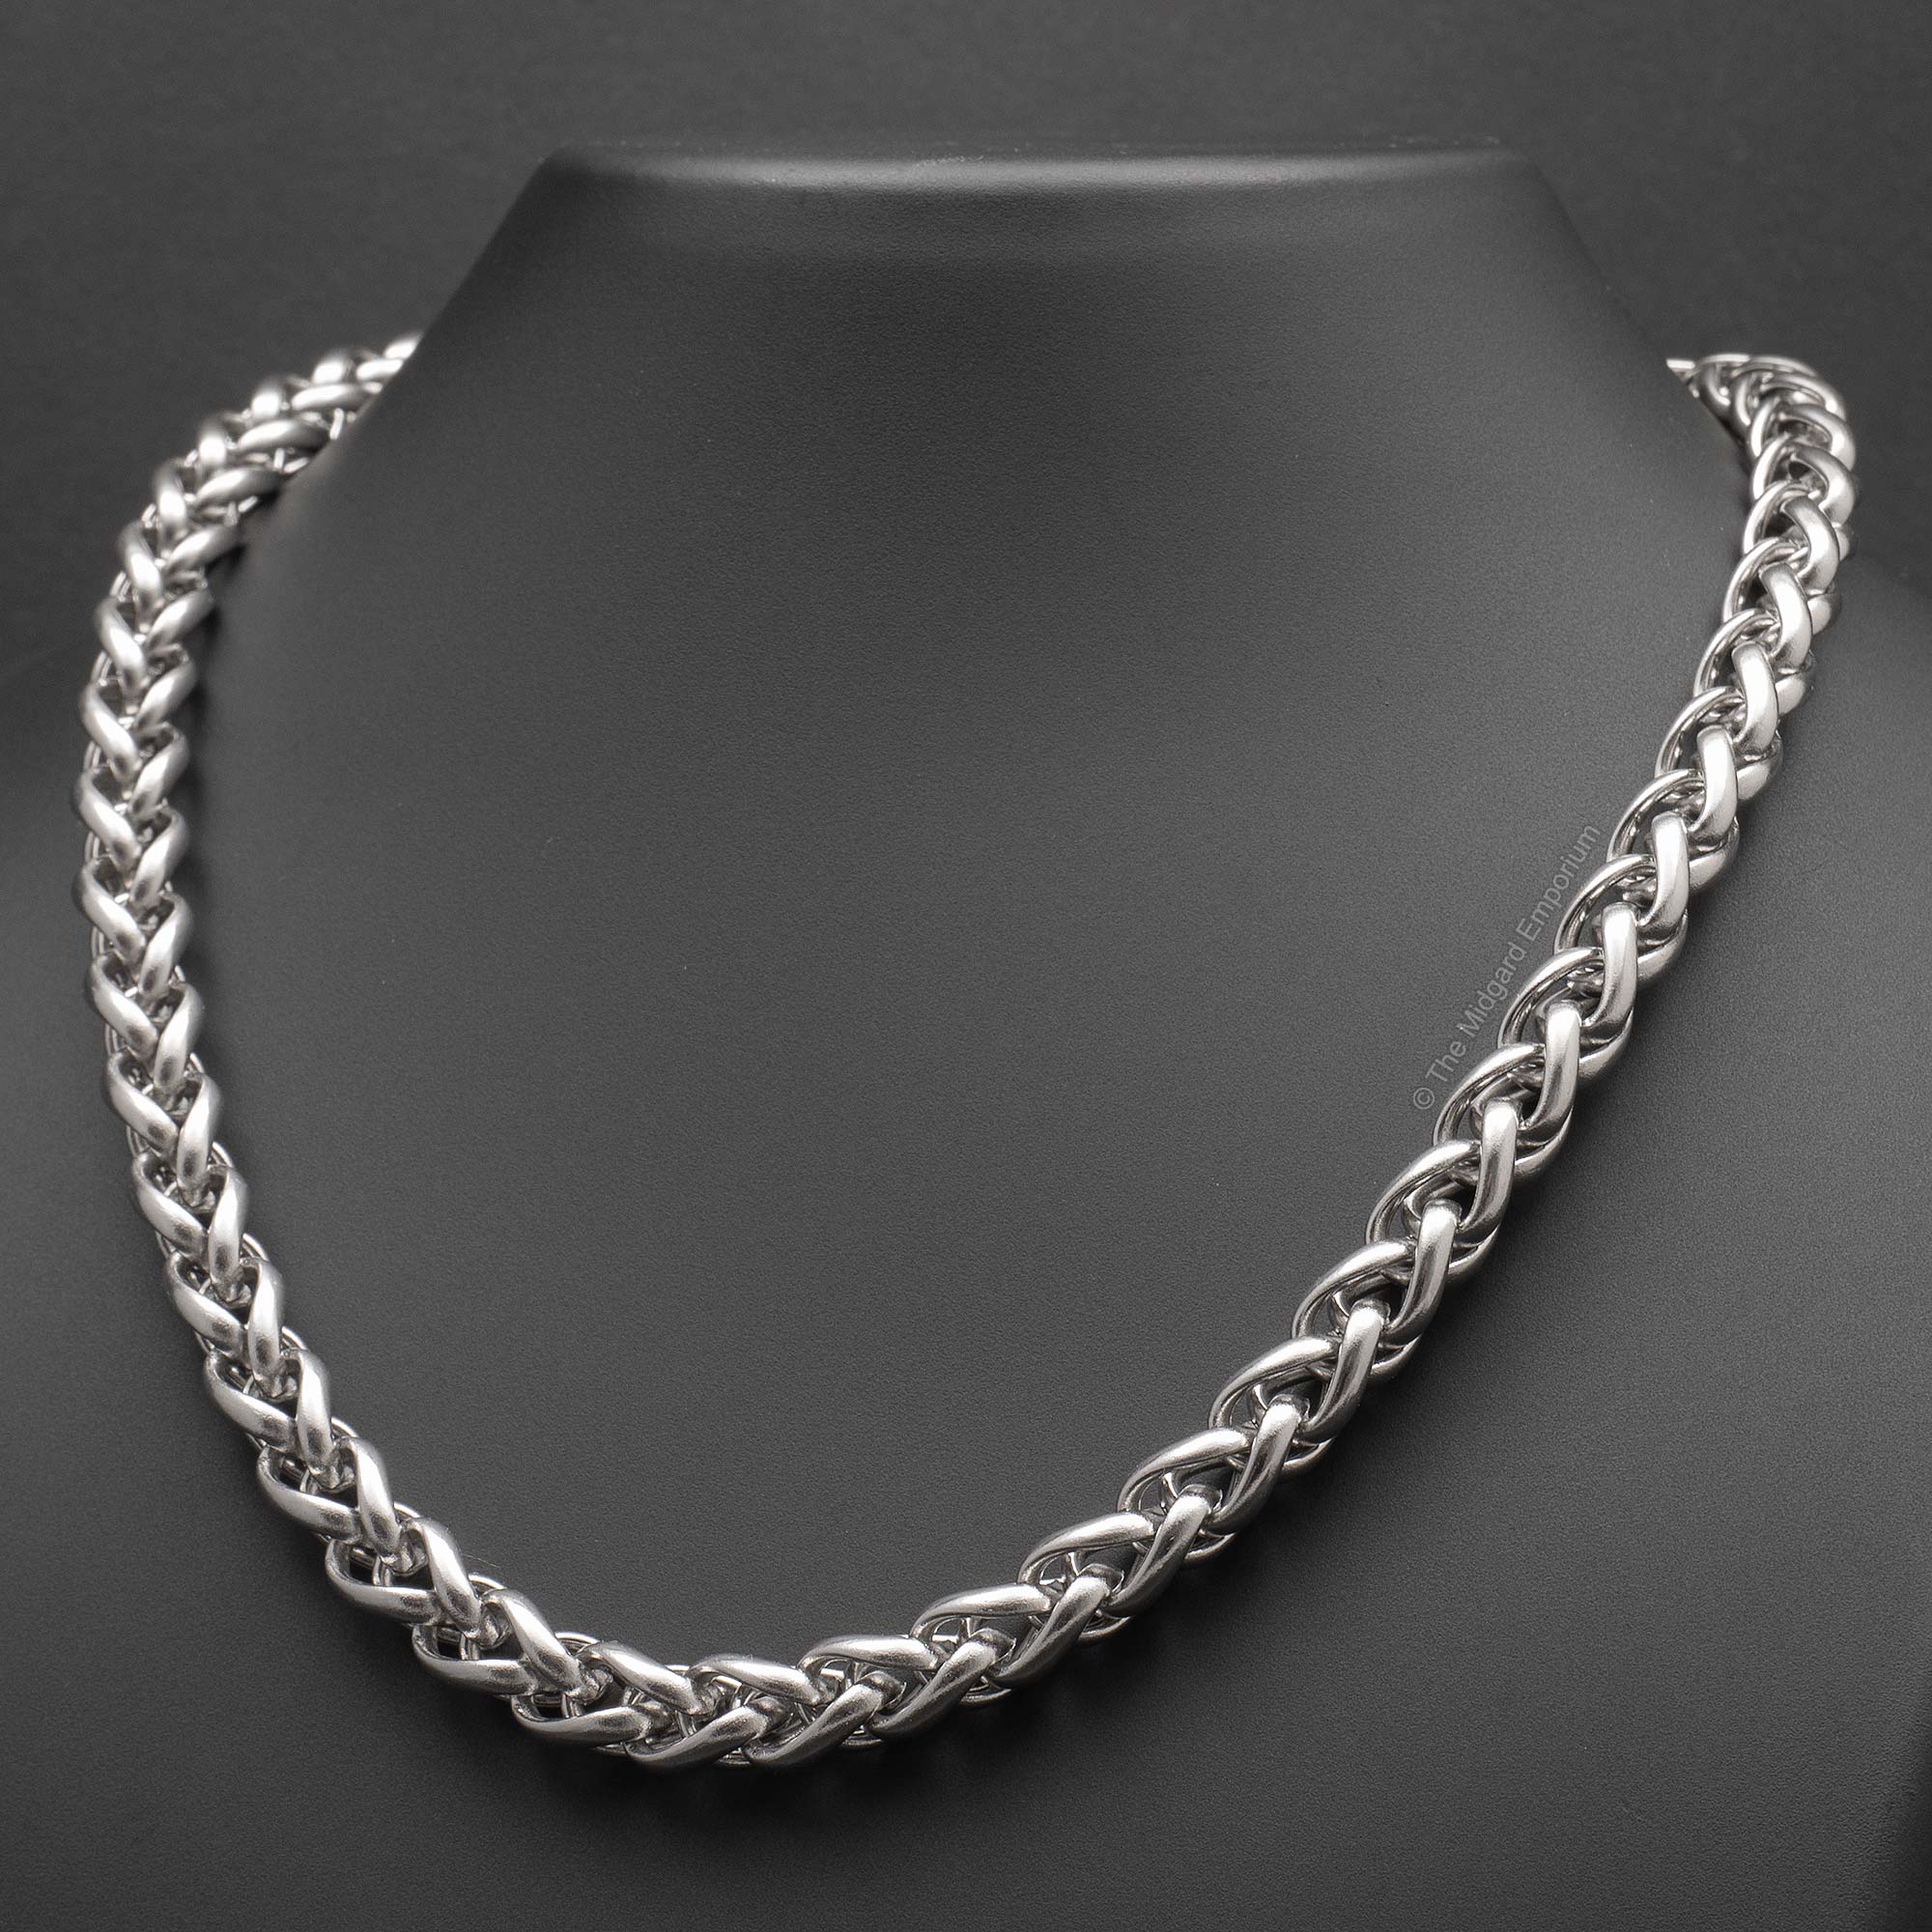 8mm Stainless Steel Wheat Chain Necklace - The Midgard Emporium